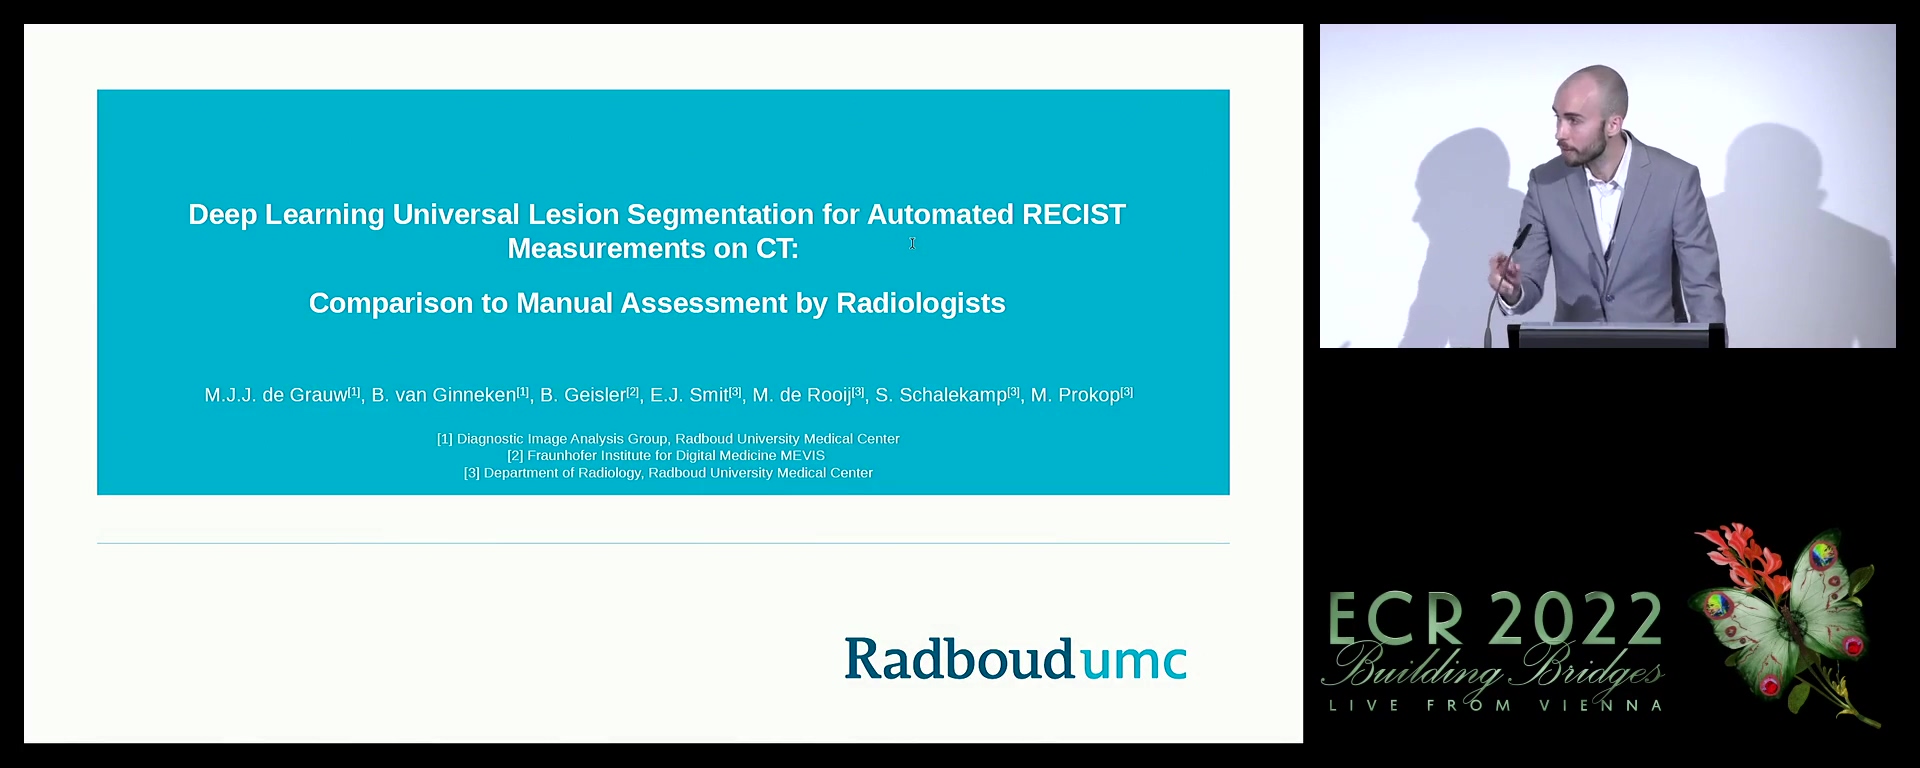 Deep learning universal lesion segmentation for automated RECIST measurements on CT: comparison to manual assessment by radiologists